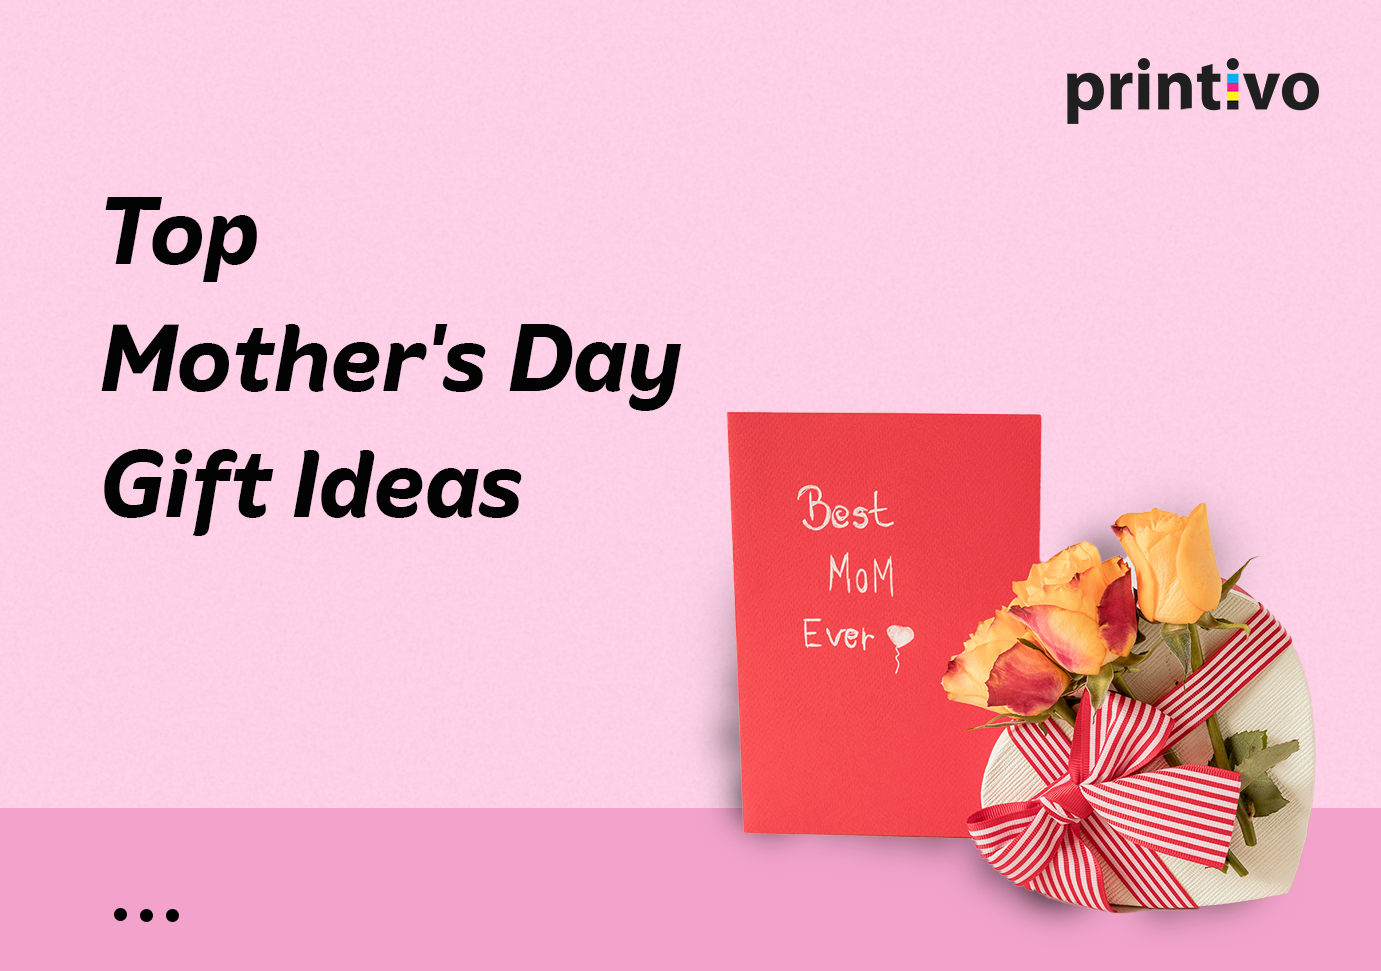 Top Mother’s Day Gift Ideas for 2023 Printspirations by Printivo